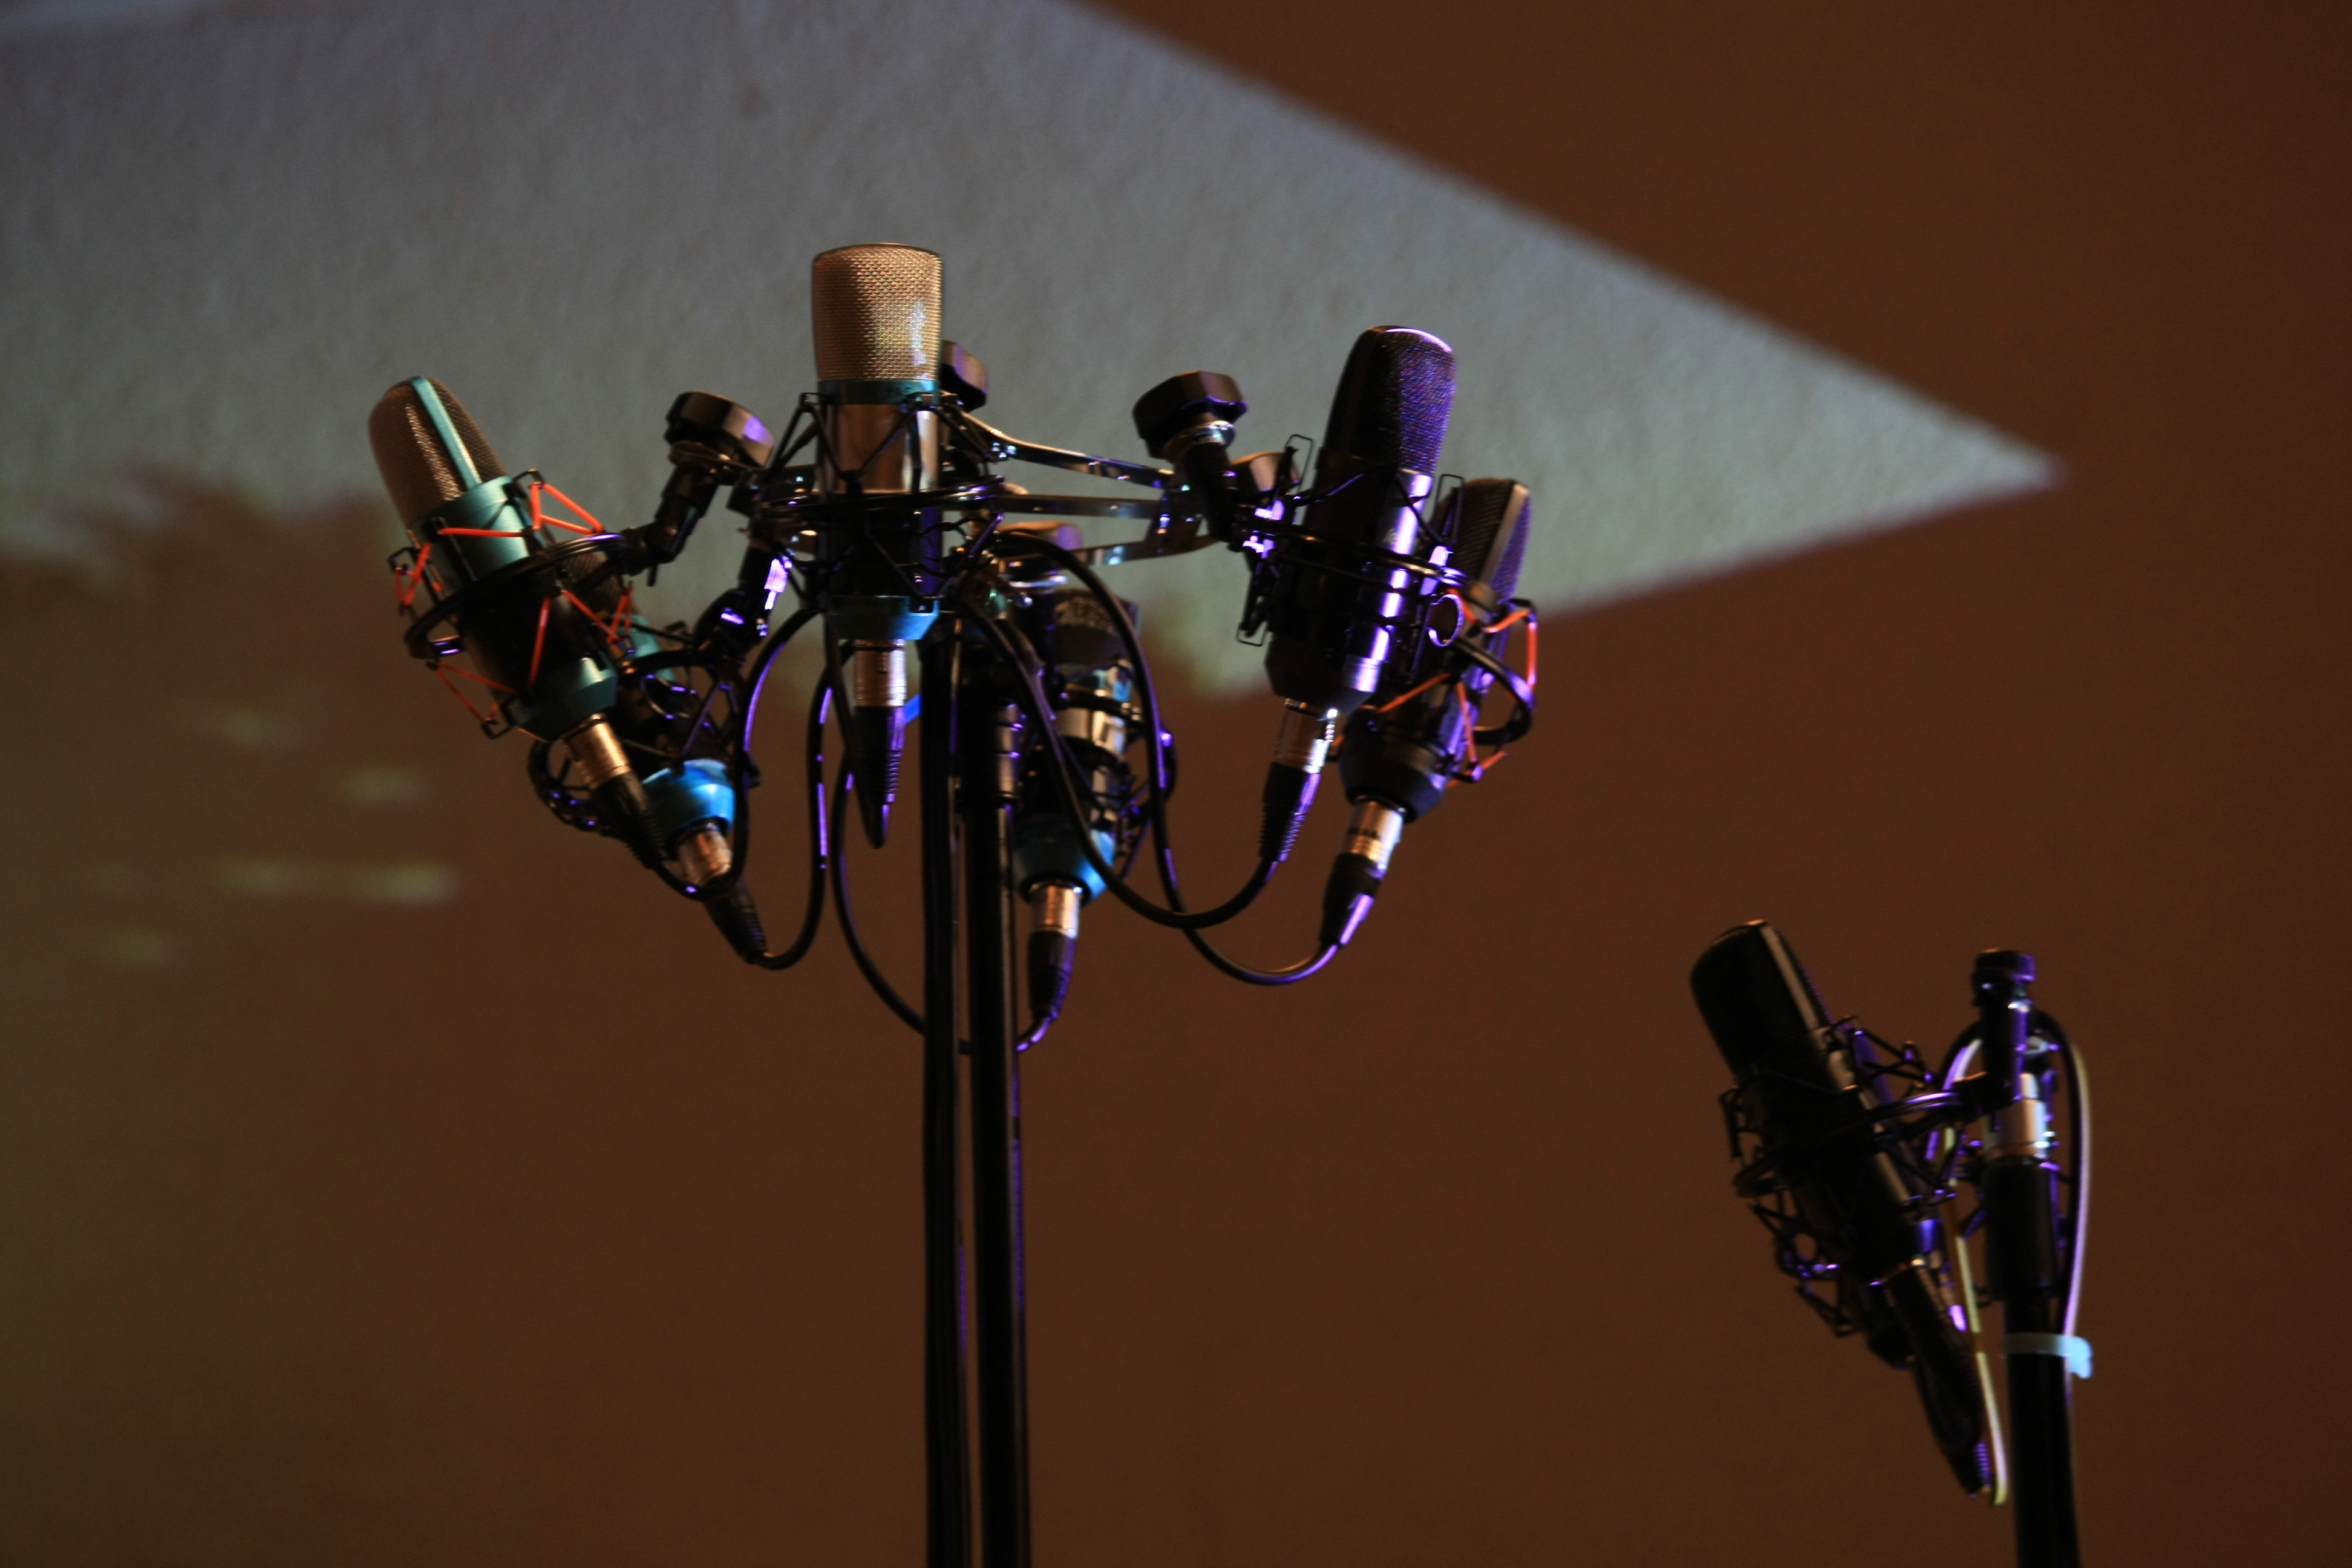 Recording and reproduction are technologies that are familiar with music.